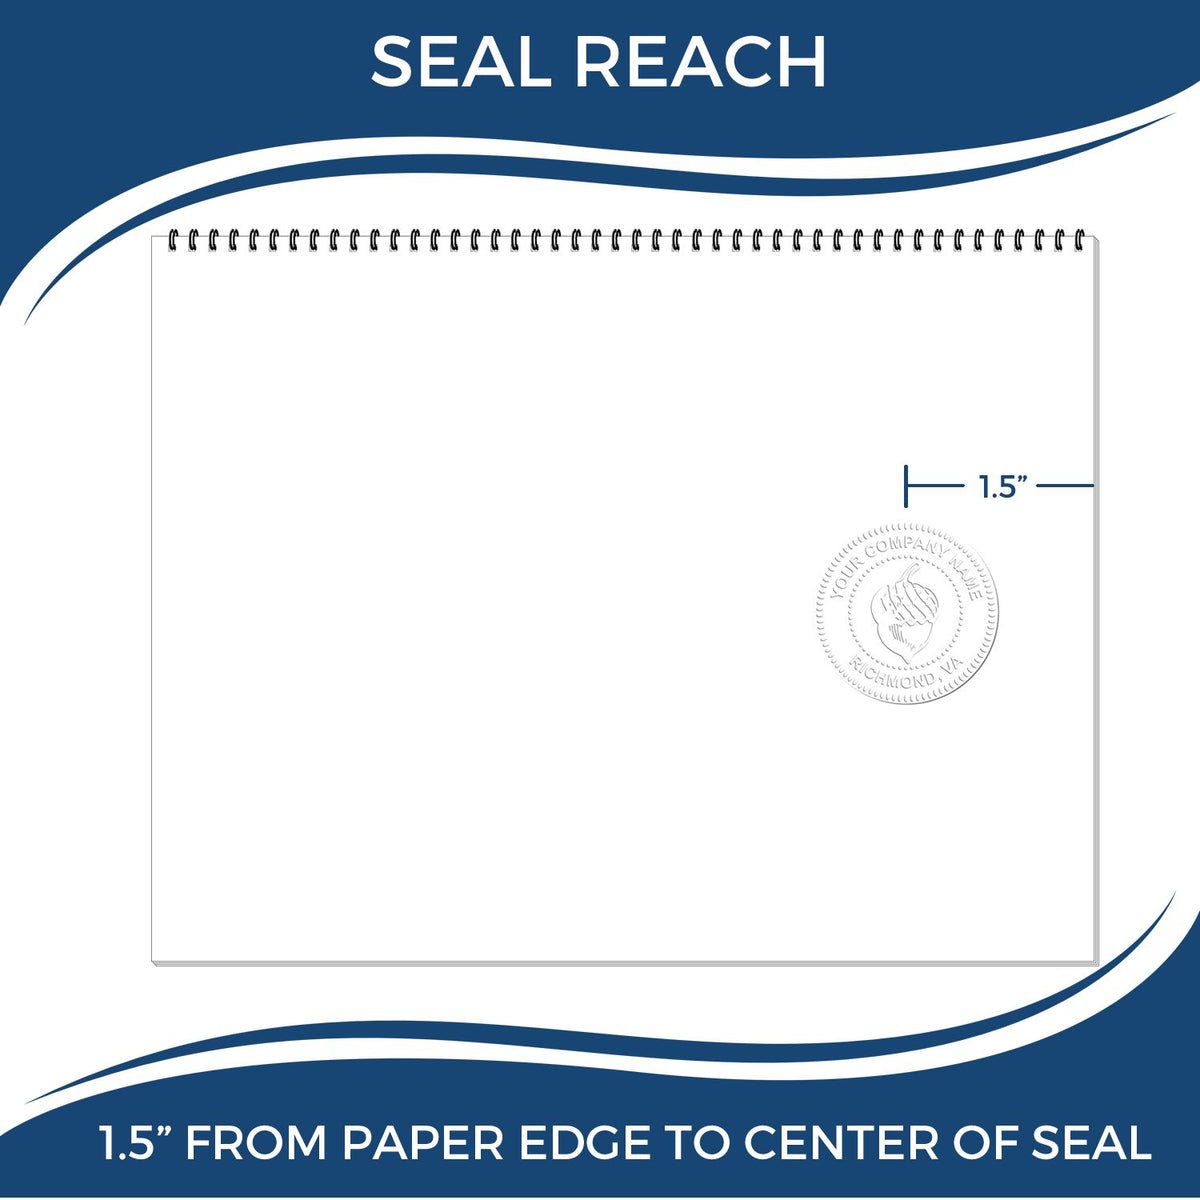 An infographic showing the seal reach which is represented by a ruler and a miniature seal image of the Hybrid Utah Geologist Seal